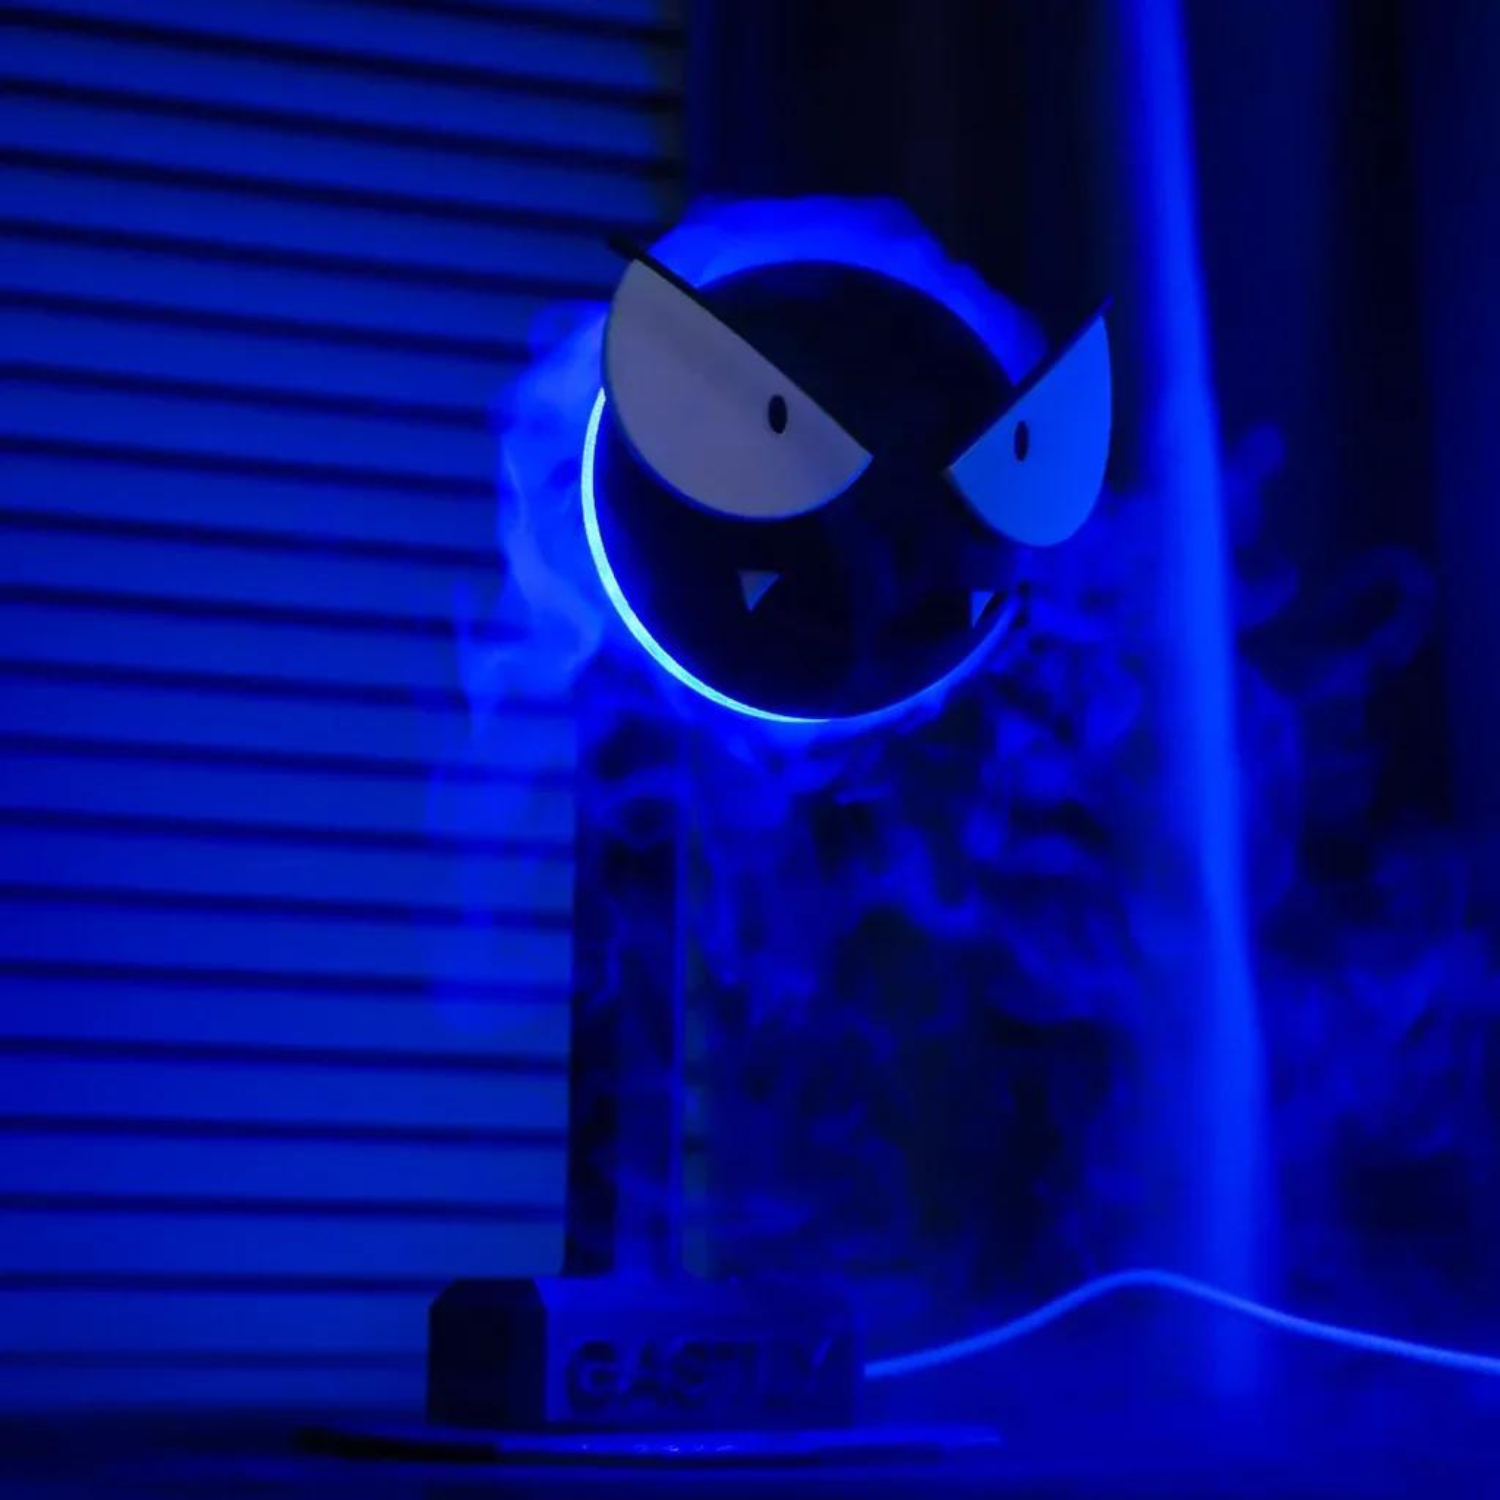 Gastly Humidifier Blue Mist - 3D printed luminous Pokémon humidifier with advanced mist emission, UV disinfection, and blue purple ambient night light glow.